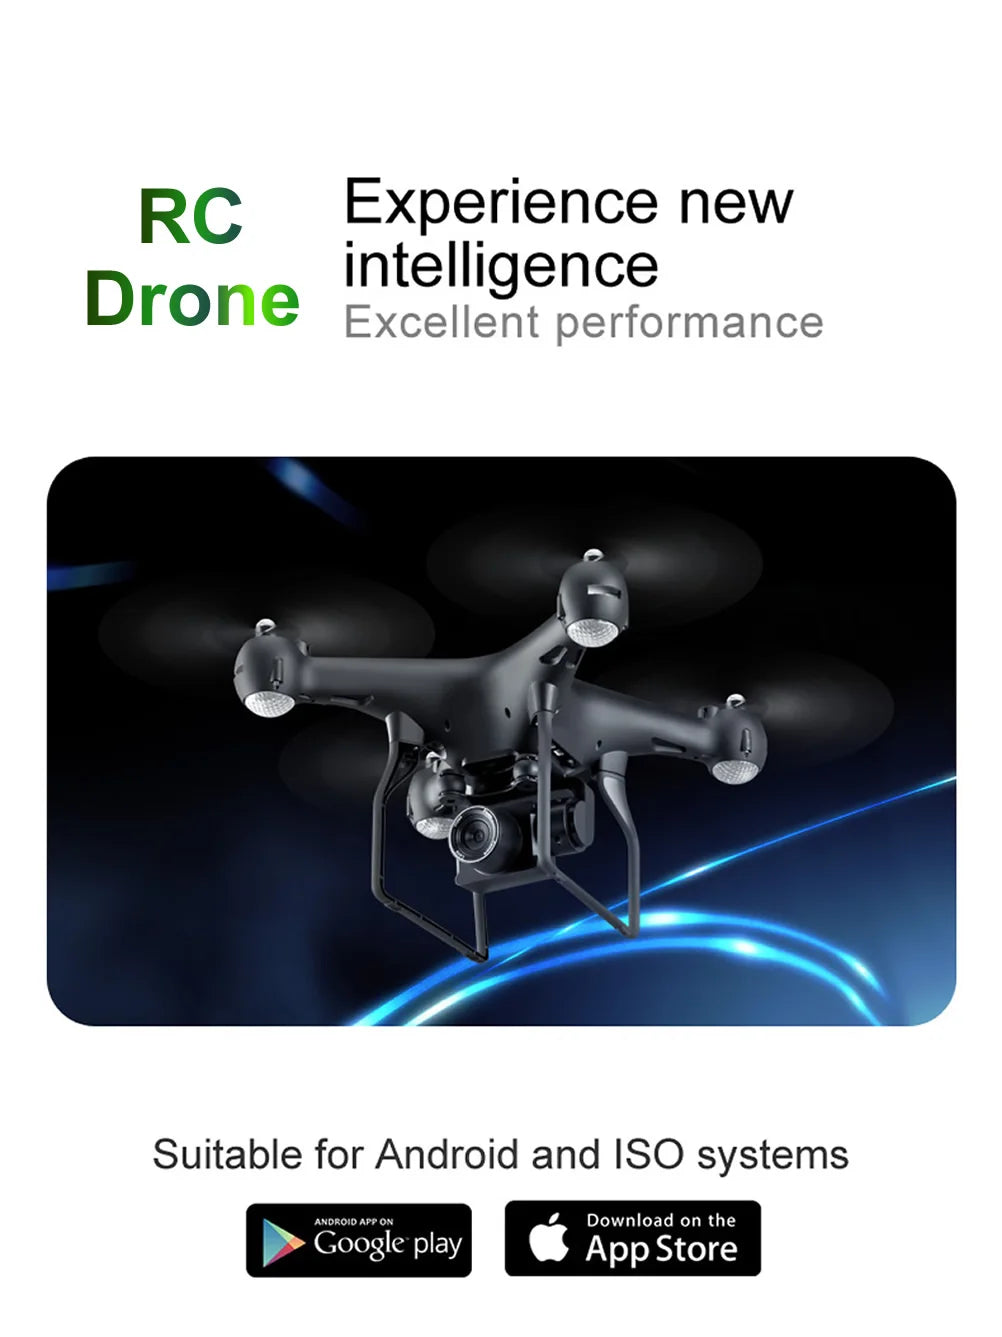 New Remote Control Drone, rc experience new drone intelligence excellent performance suitable for android and is